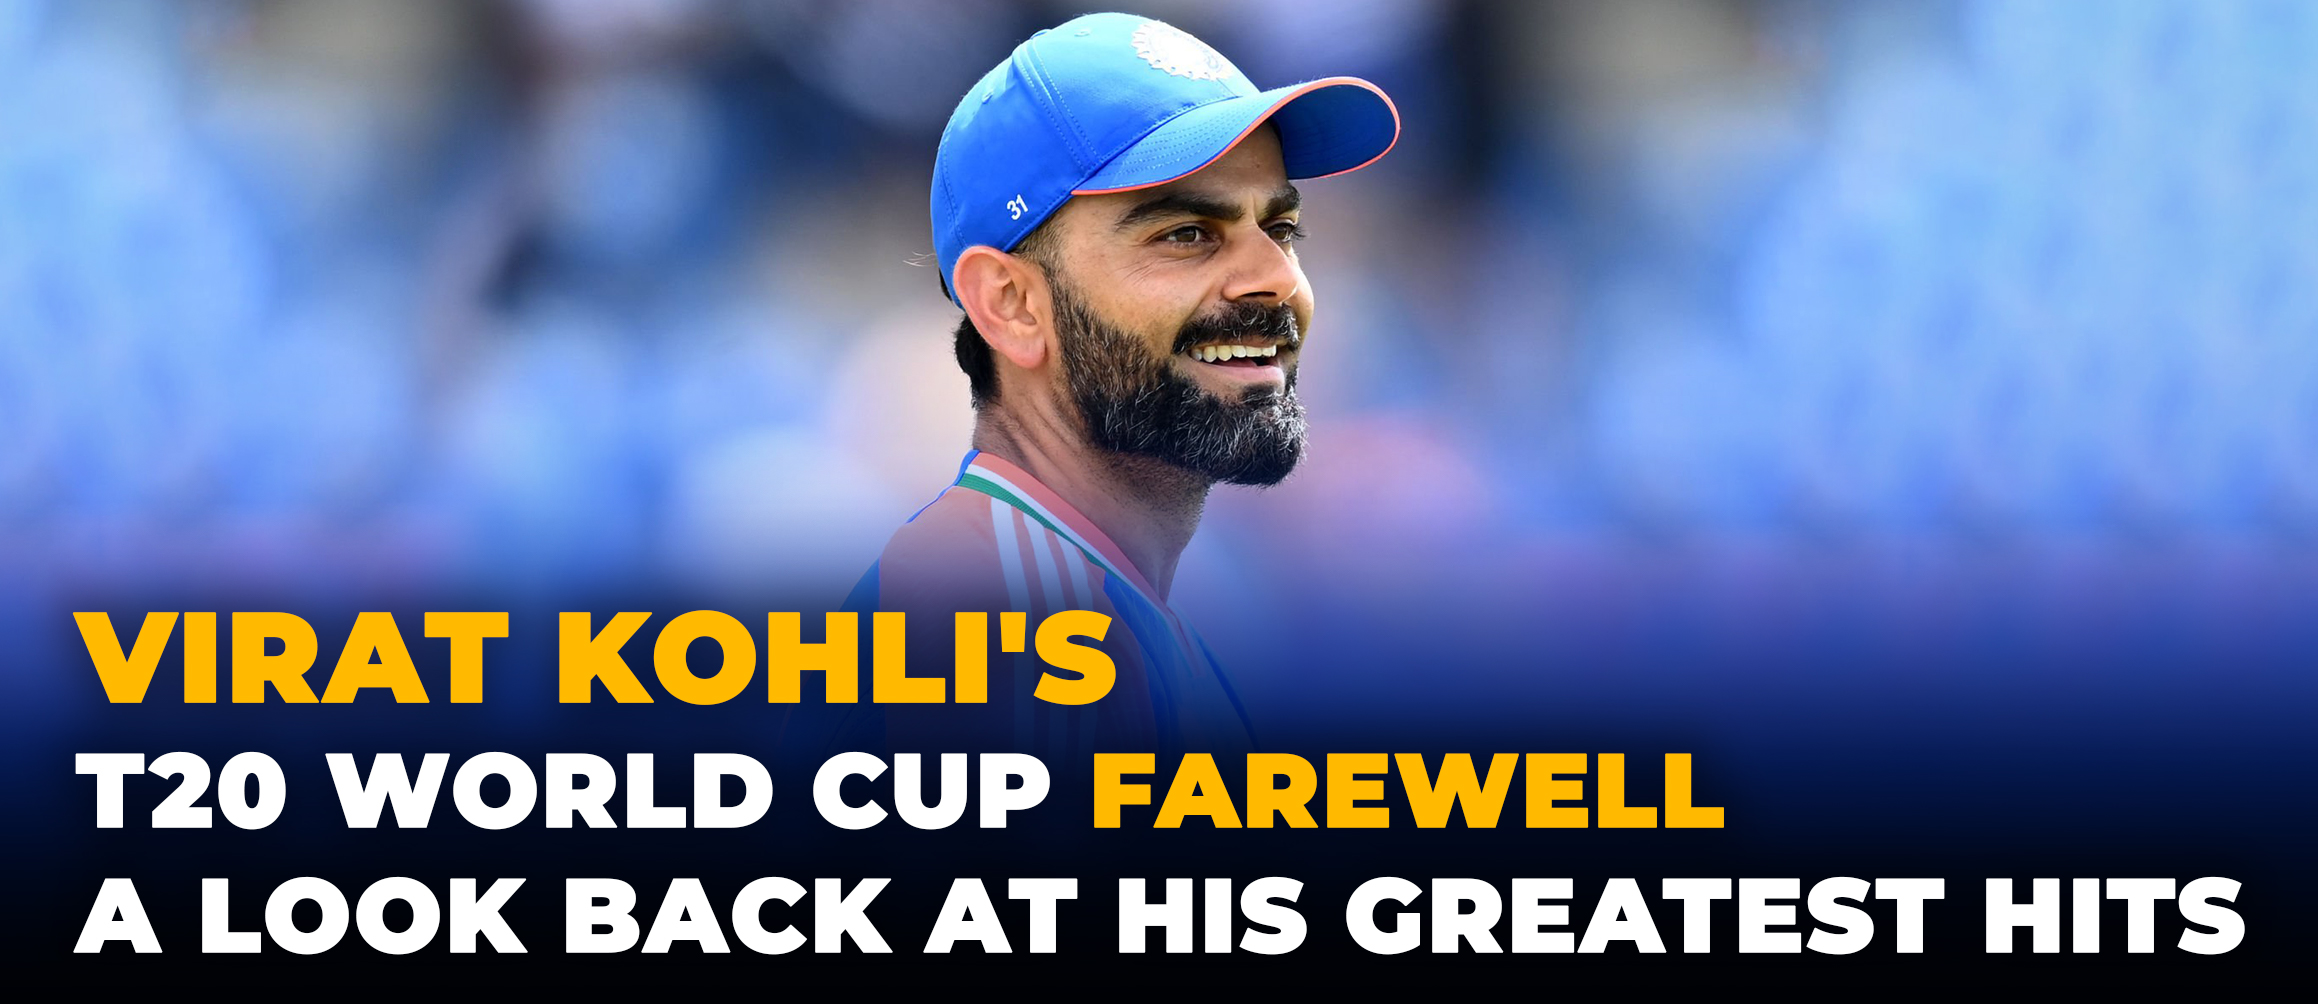 Virat Kohli’s T20 World Cup Farewell: A Look Back at His Greatest Hits